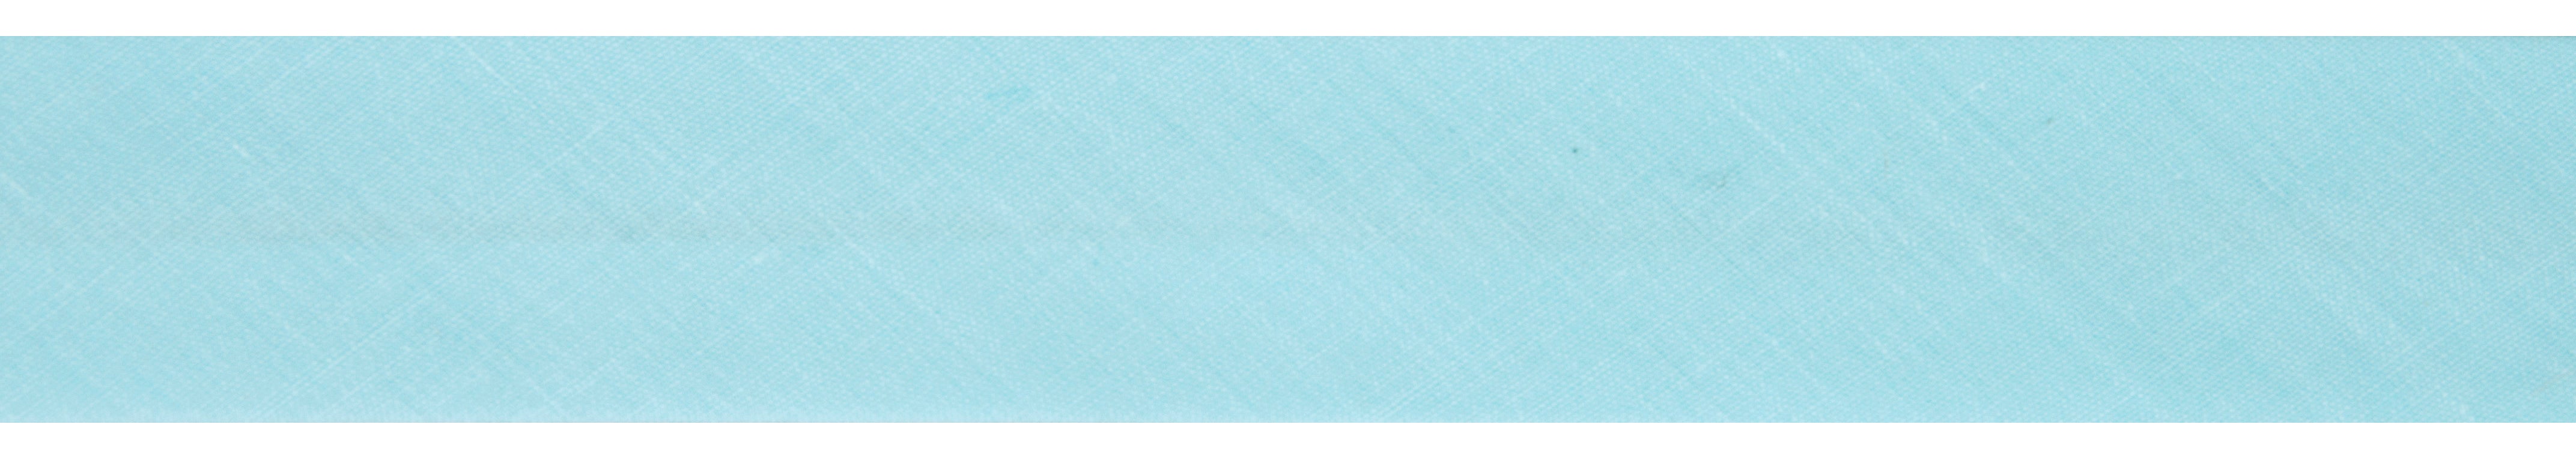 20m roll of Sky Blue Bias Binding | 25mm width from Jaycotts Sewing Supplies